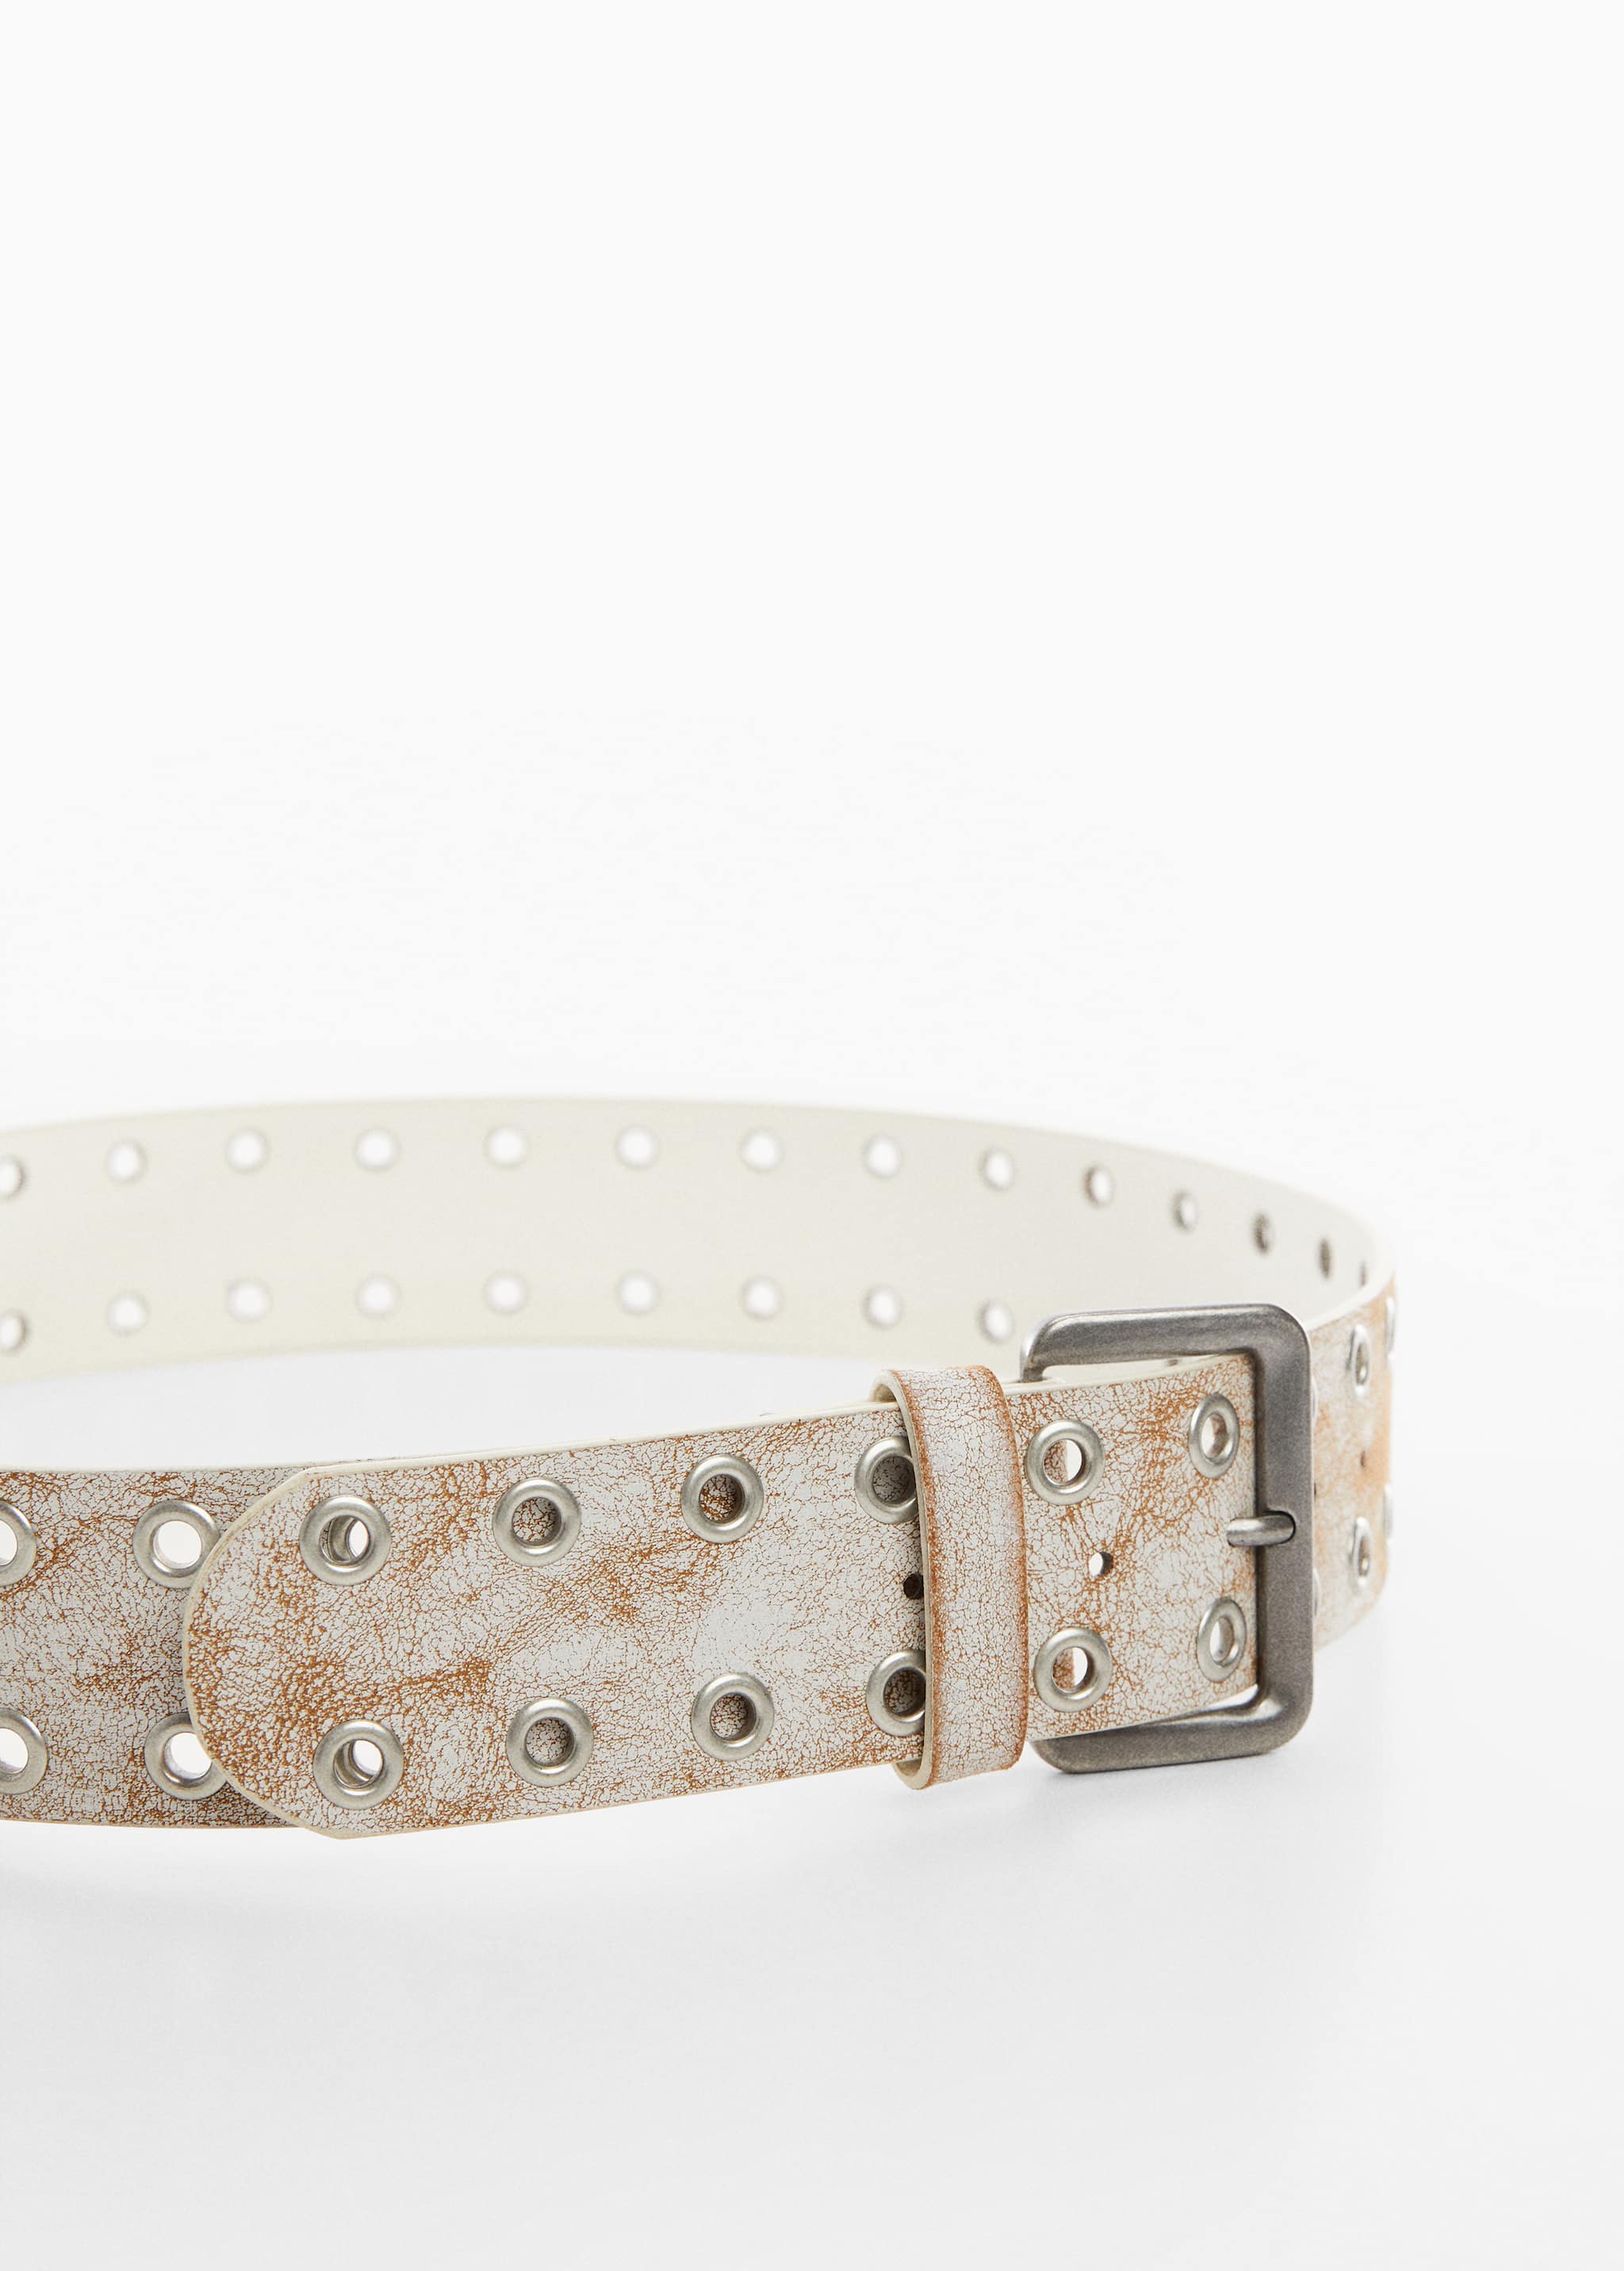 Die-cut belt with a worn effect - Details of the article 1